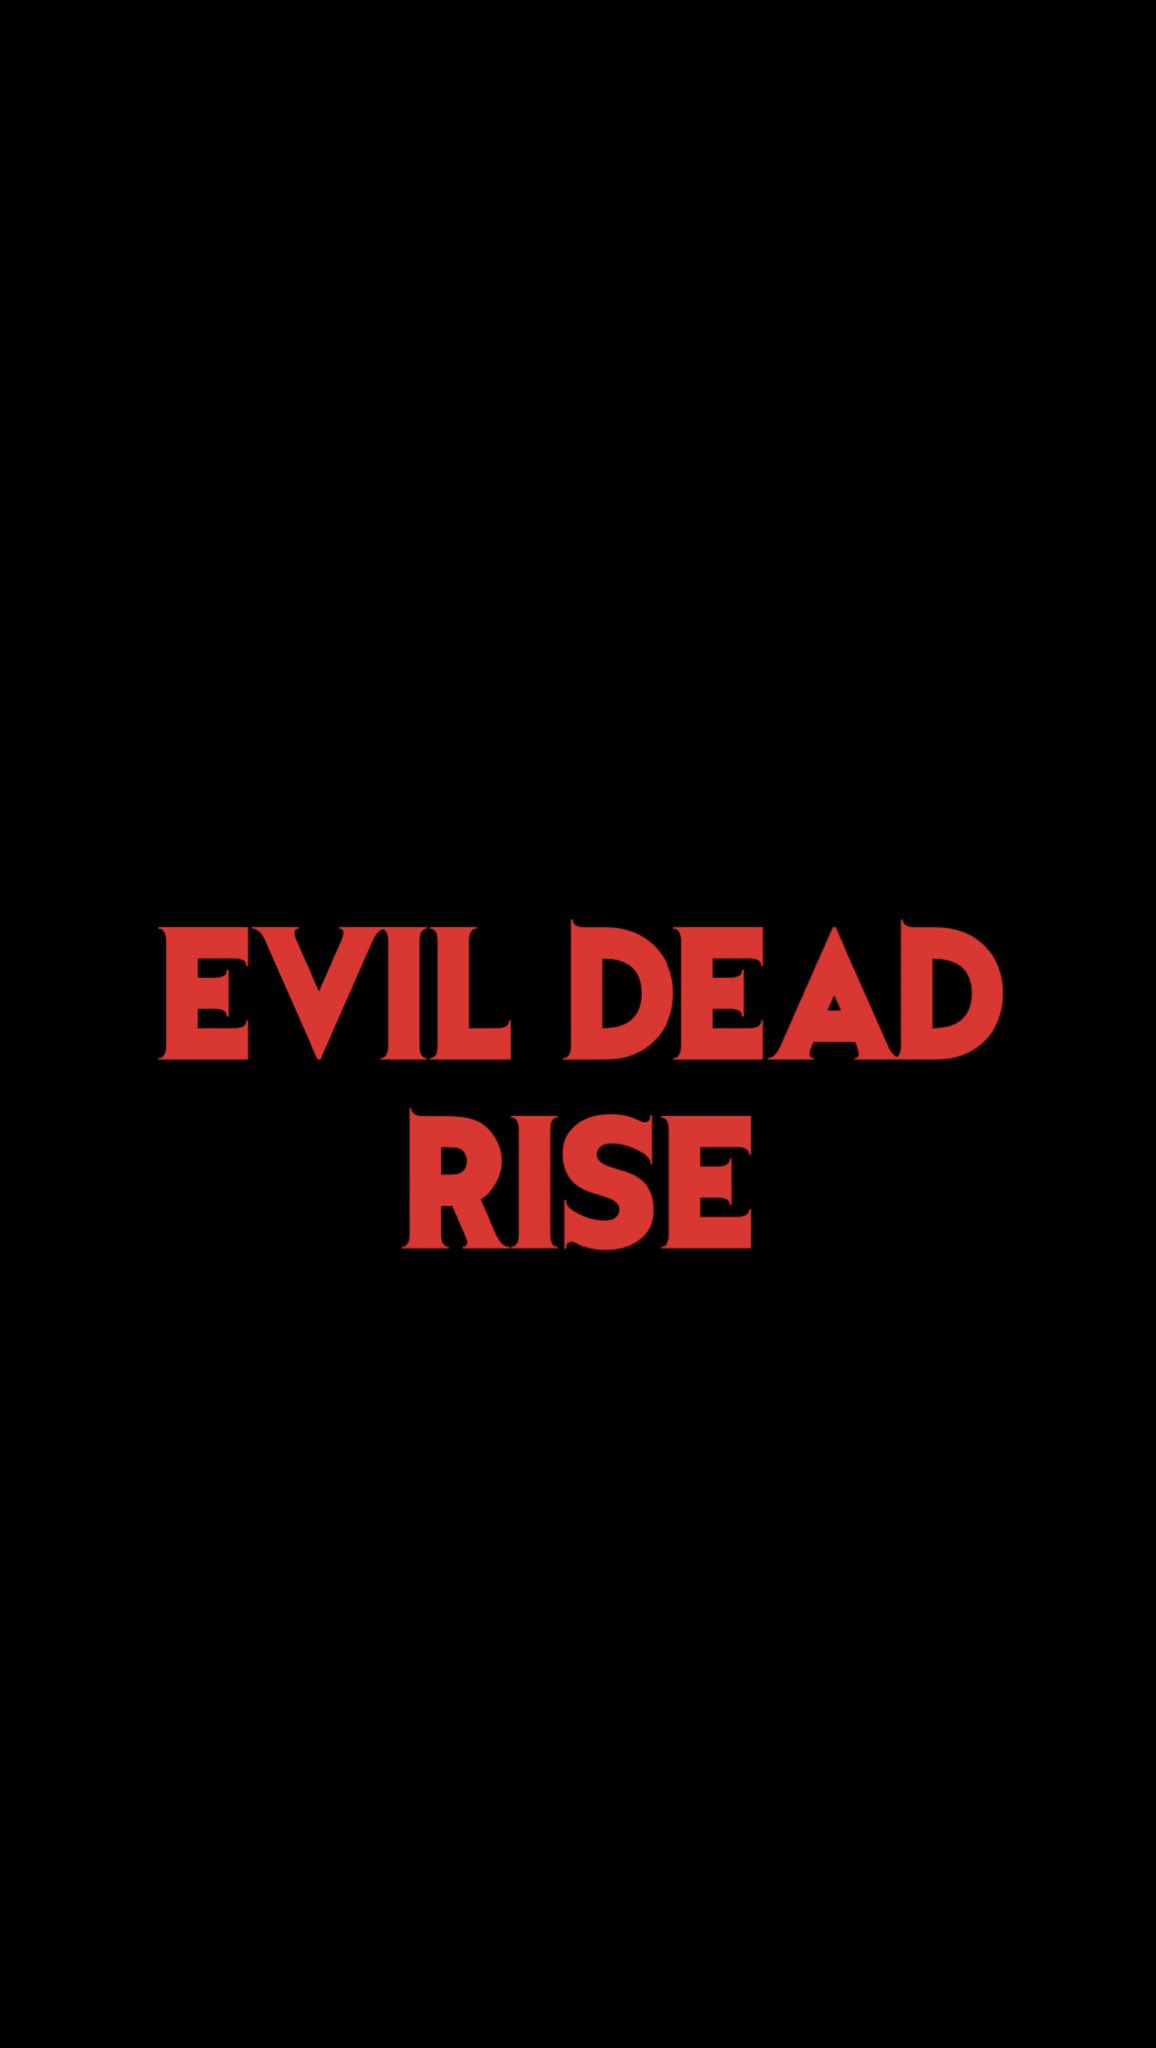 Sam Raimi Updates - 'Evil Dead Rise' has Officially been Rated R for Strong Bloody Horror Violence